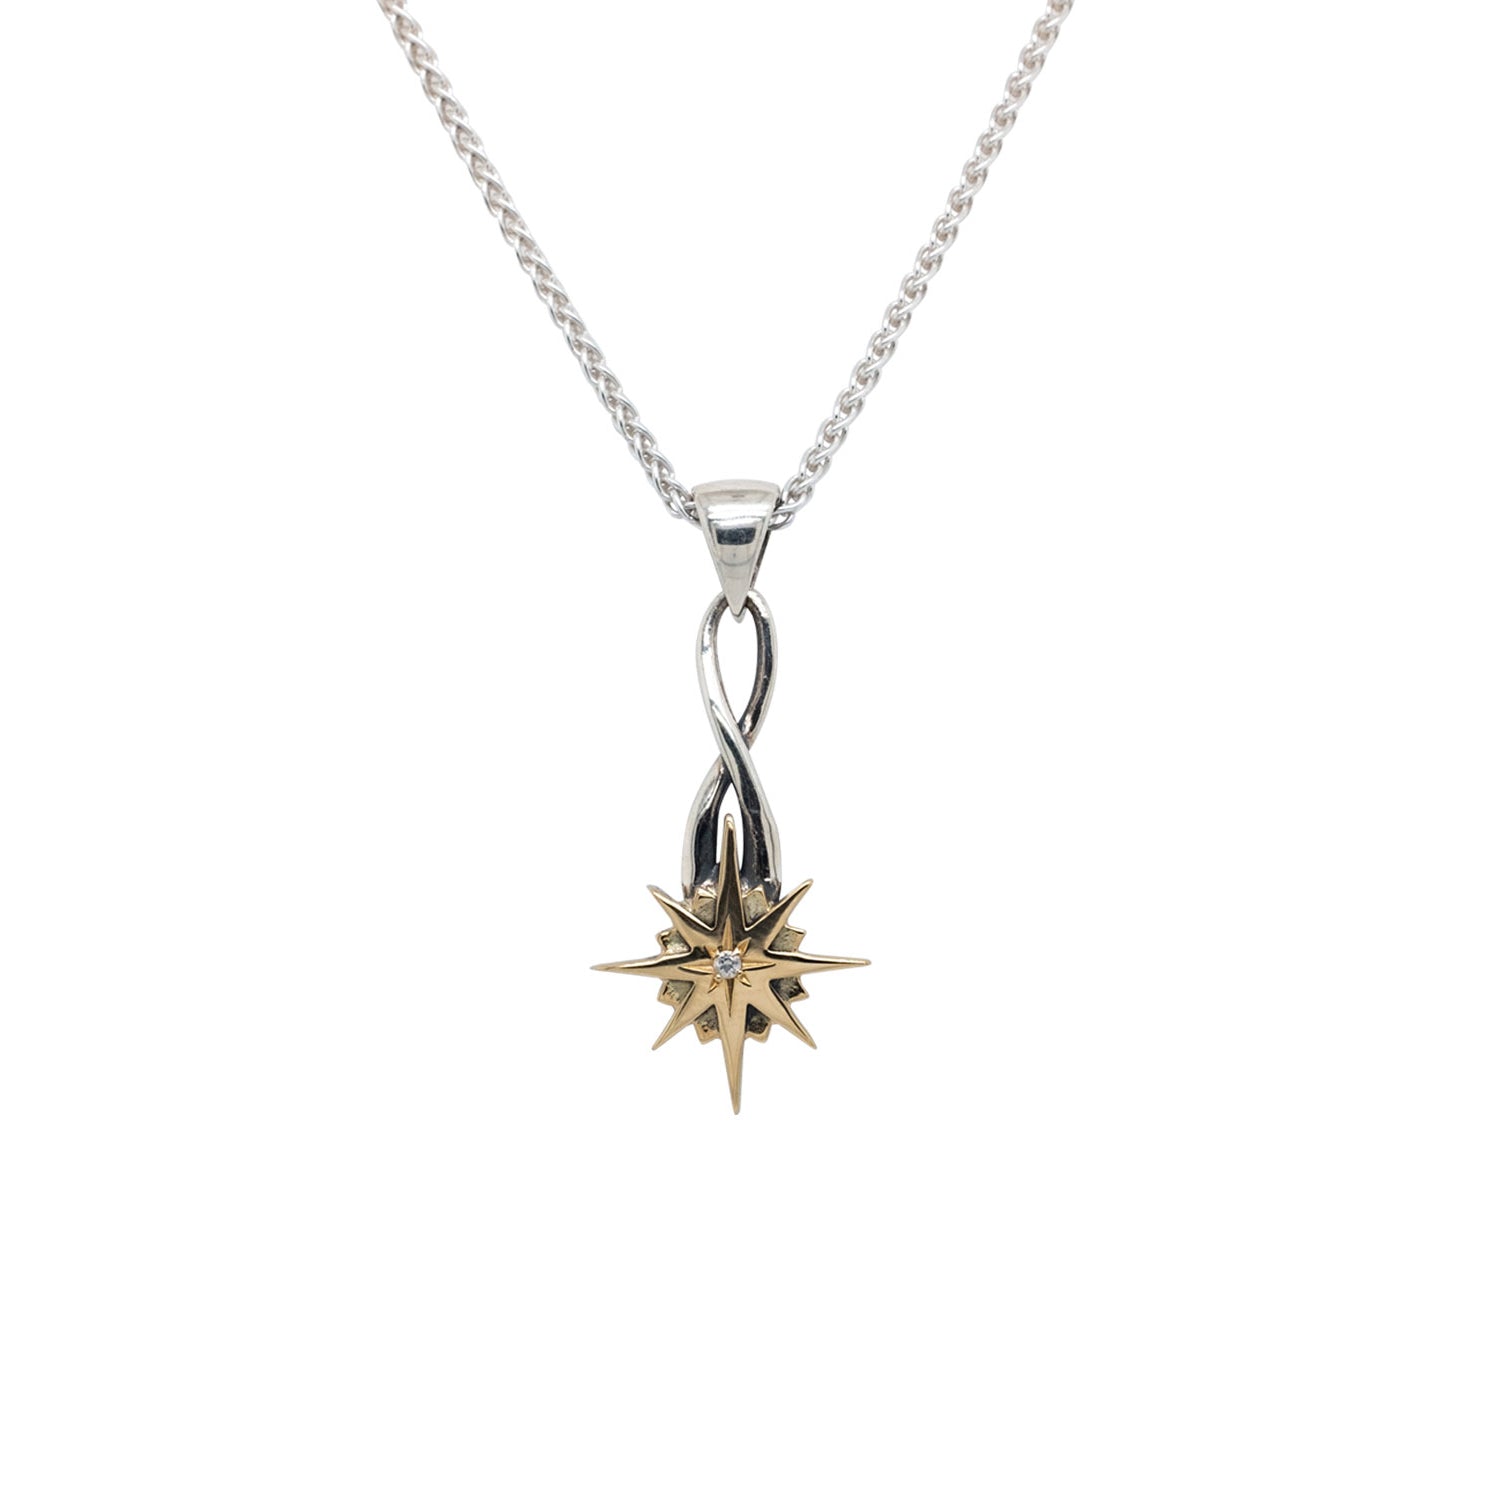 Pendant 10k Compass with White Sapphire (1.3mm) Star Small Pendant from welch and company jewelers near syracuse ny 